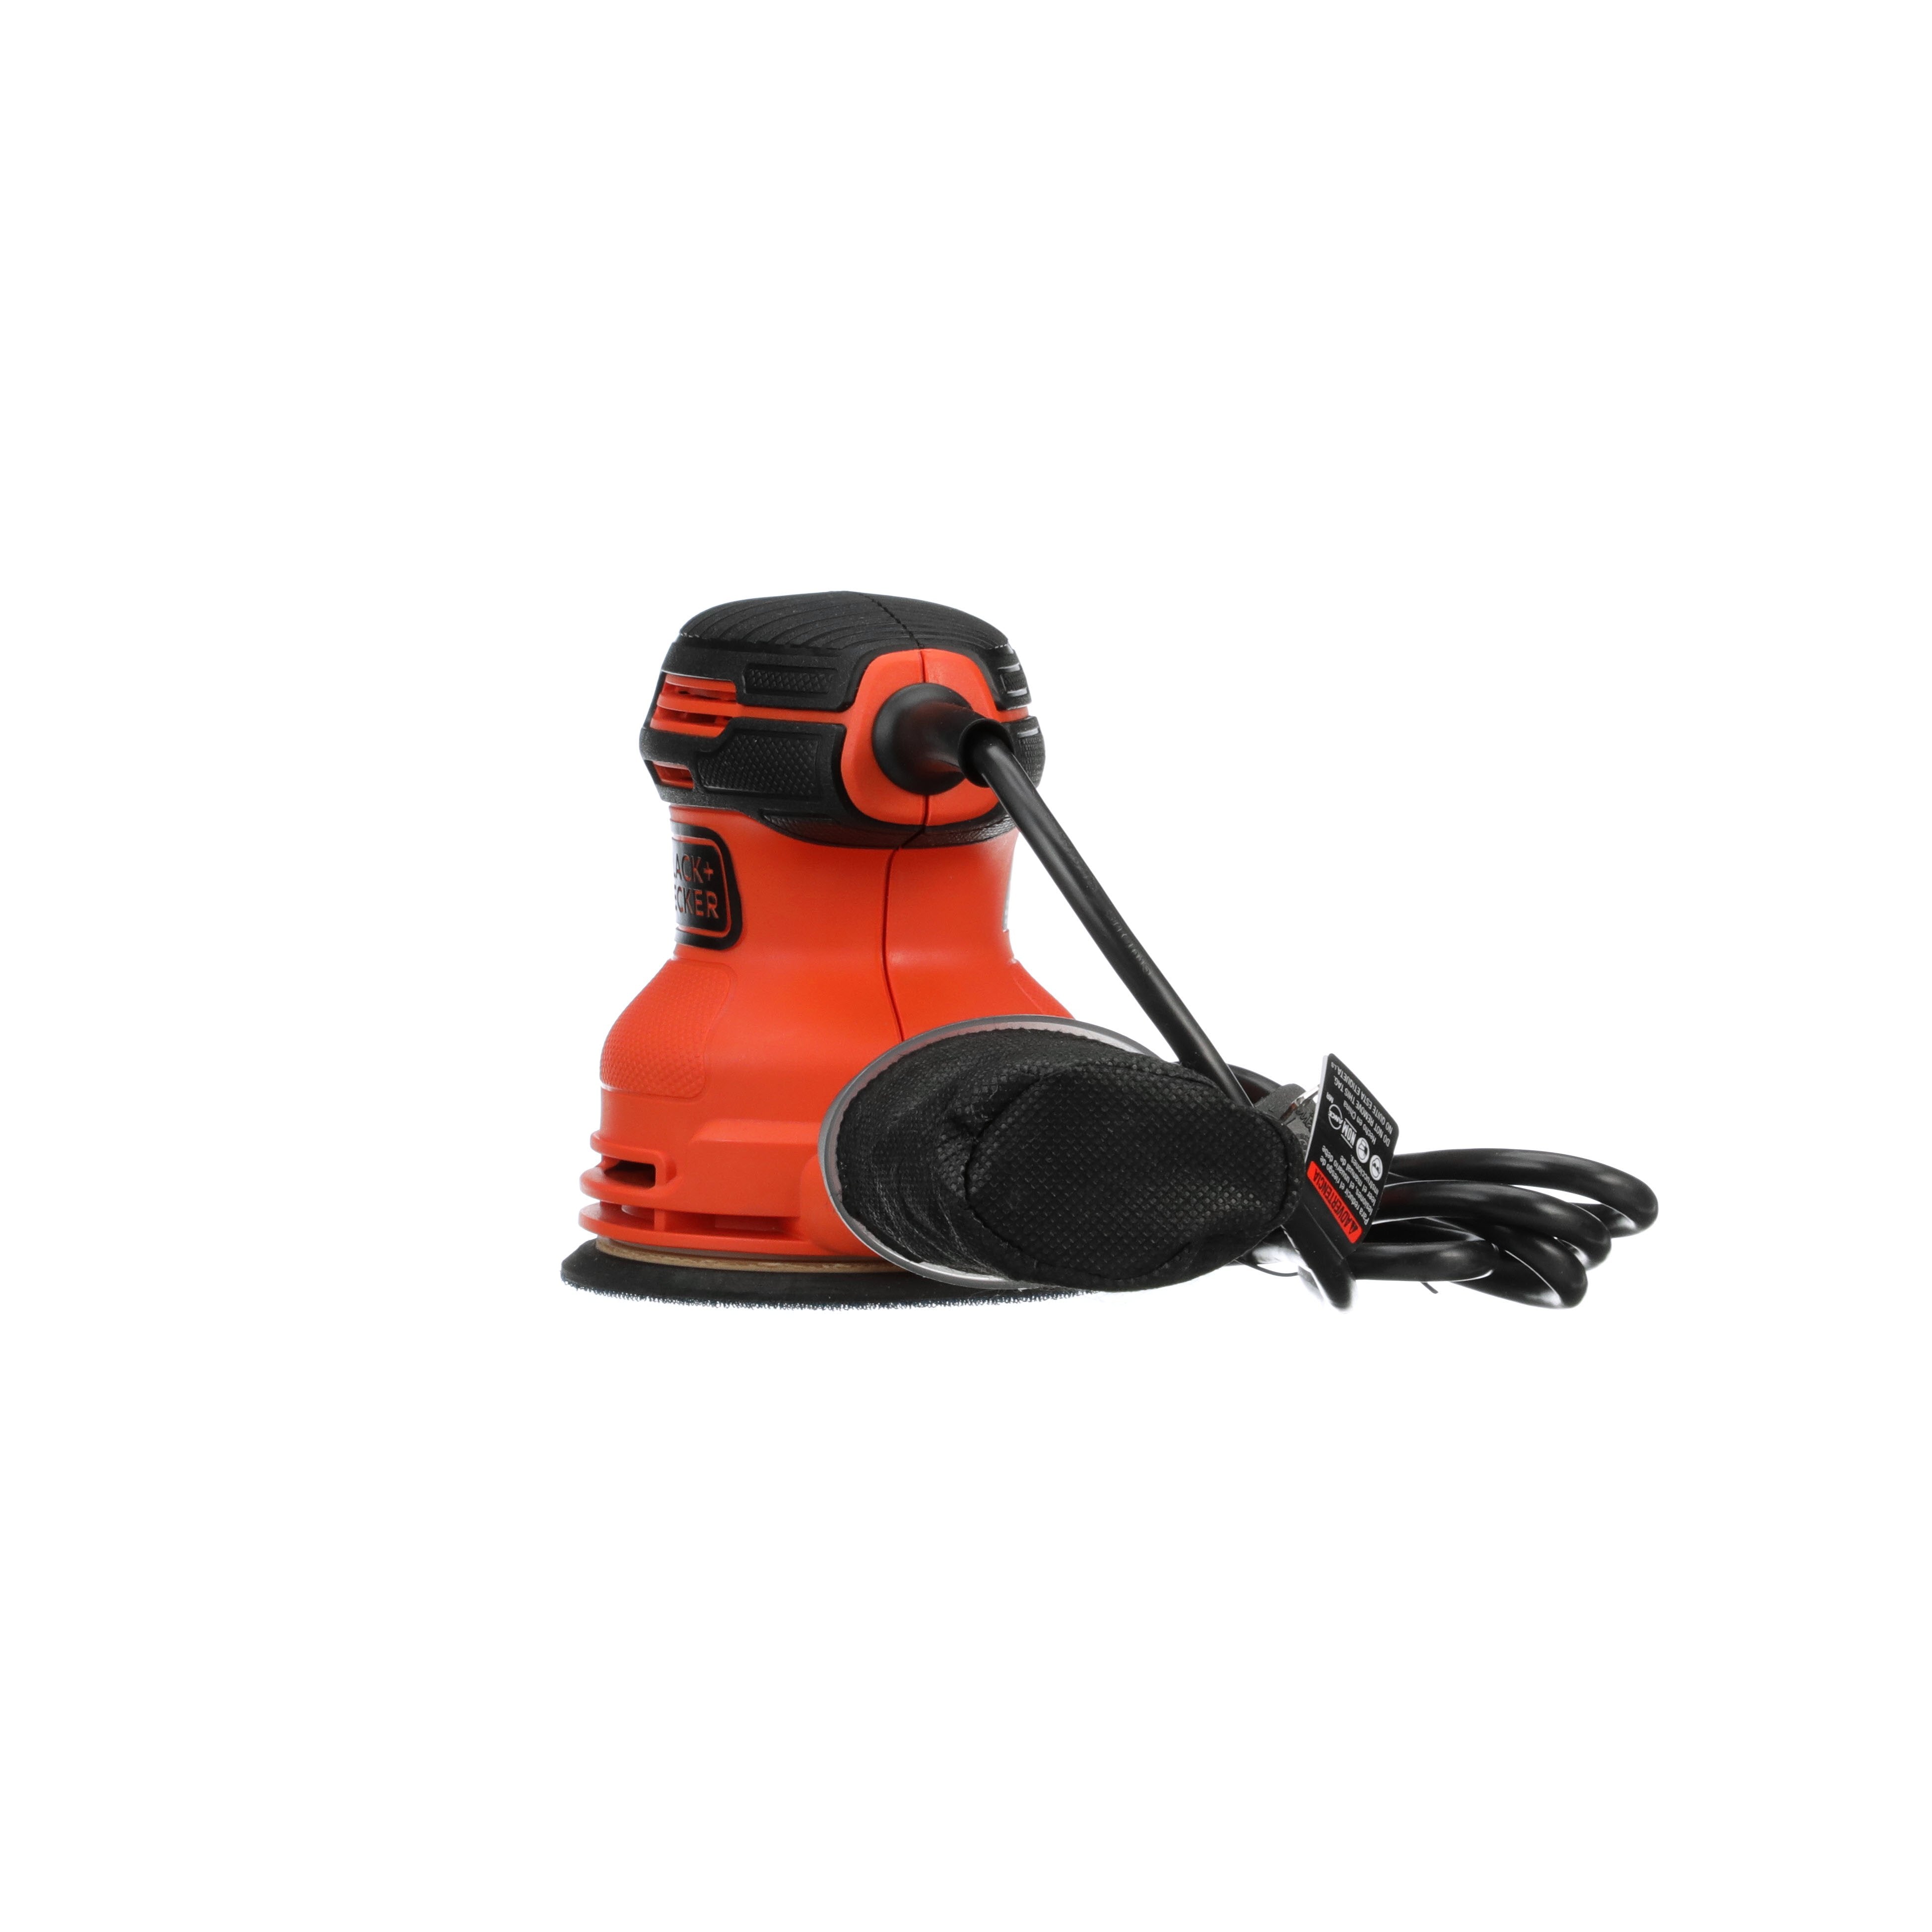 Buy A Black & Decker KA150K Spare part or Replacement part for Your Orbital  Sanders and Fix Your Machine Today